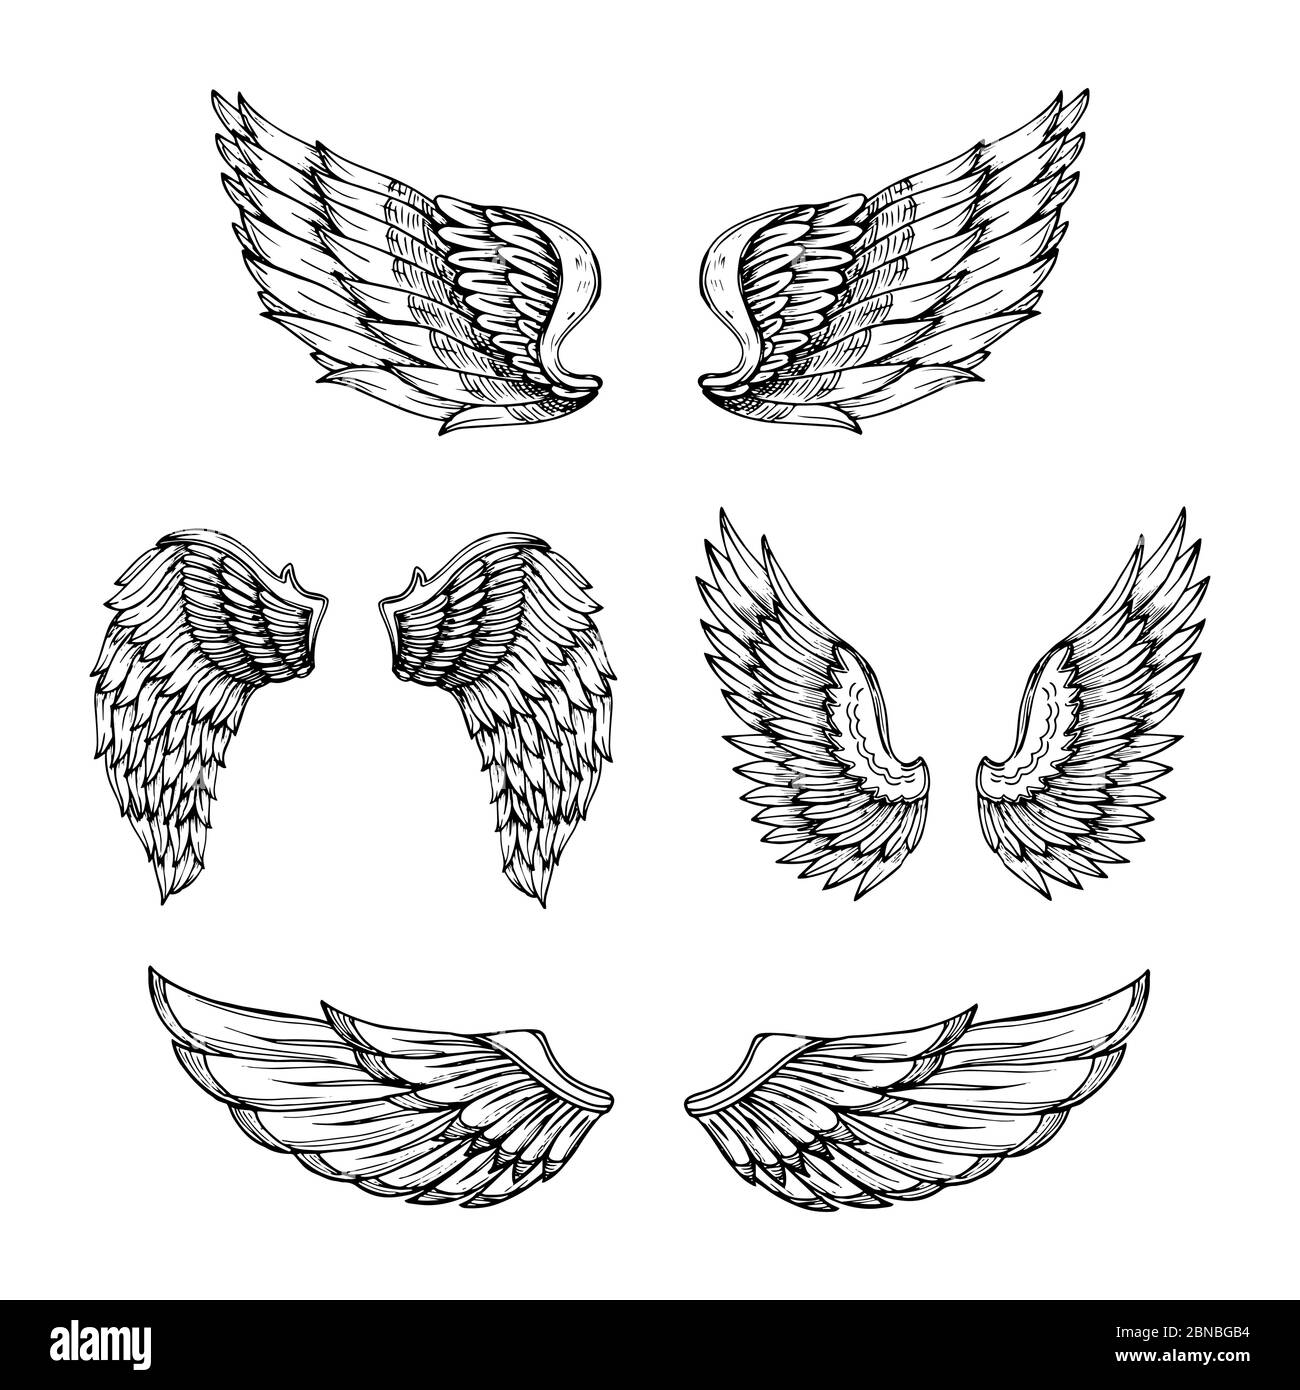 Eagle wings tattoo png images | PNGWing-cheohanoi.vn